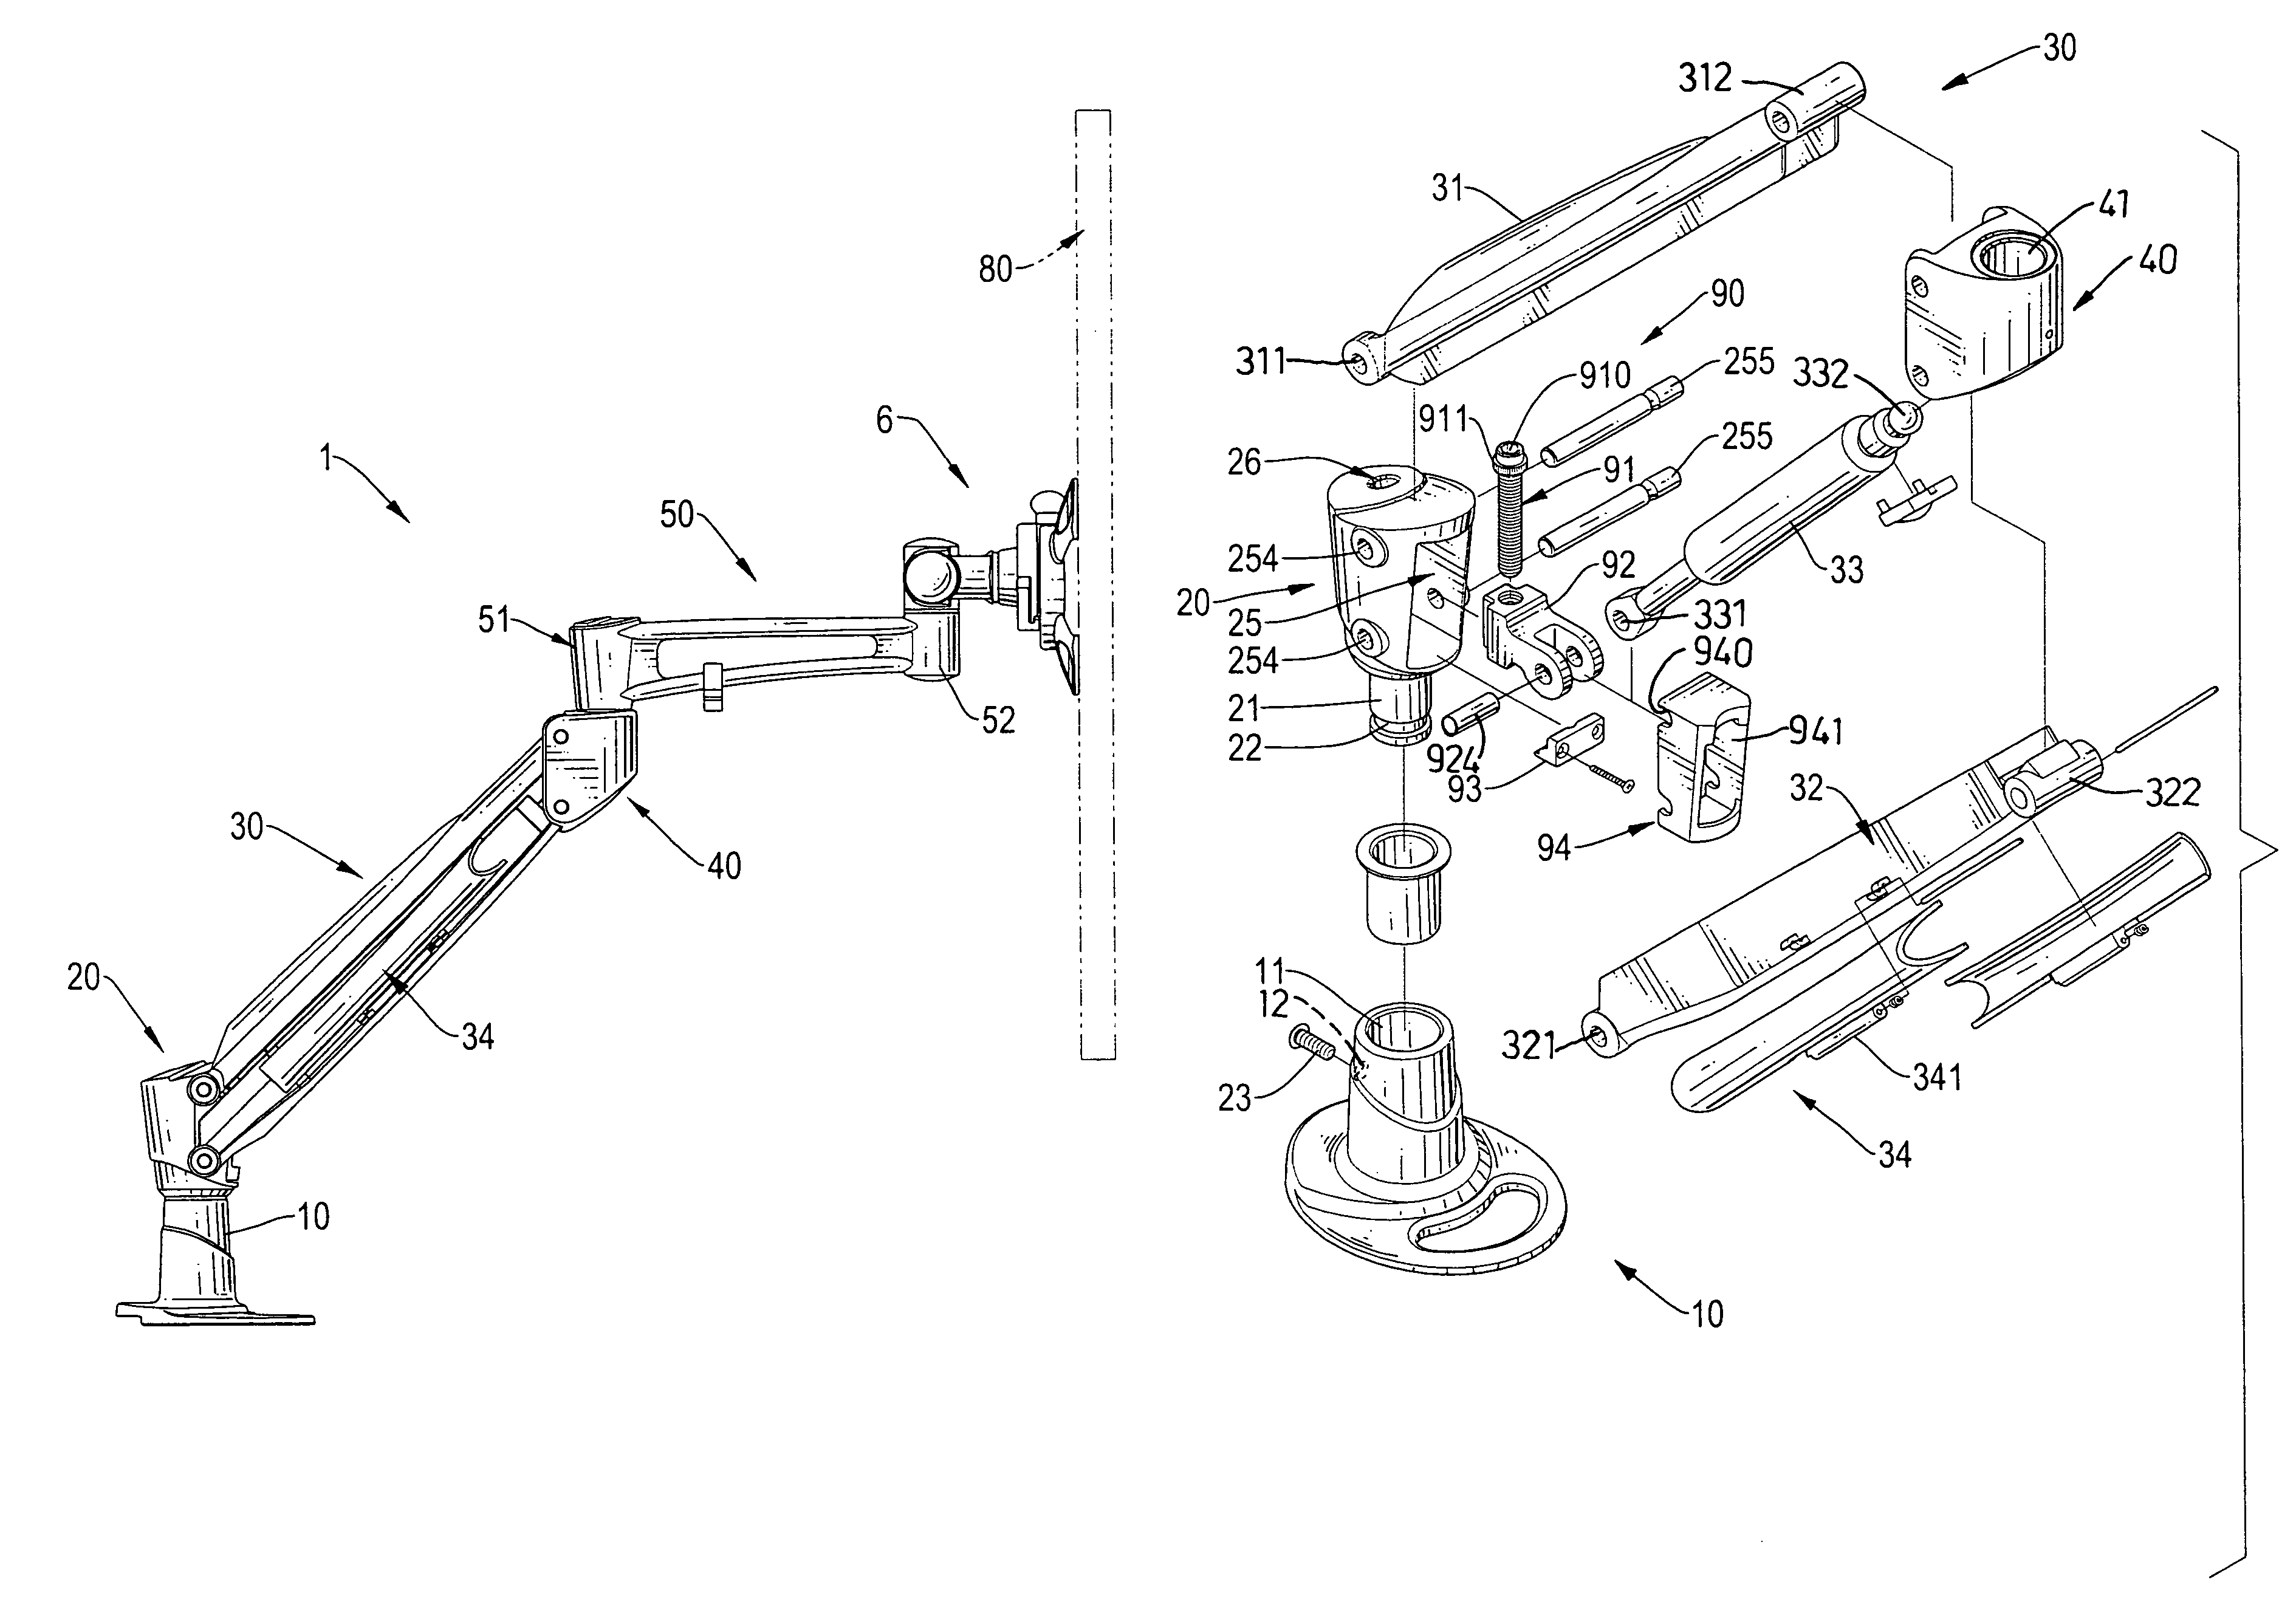 Support apparatus for suspending a monitor